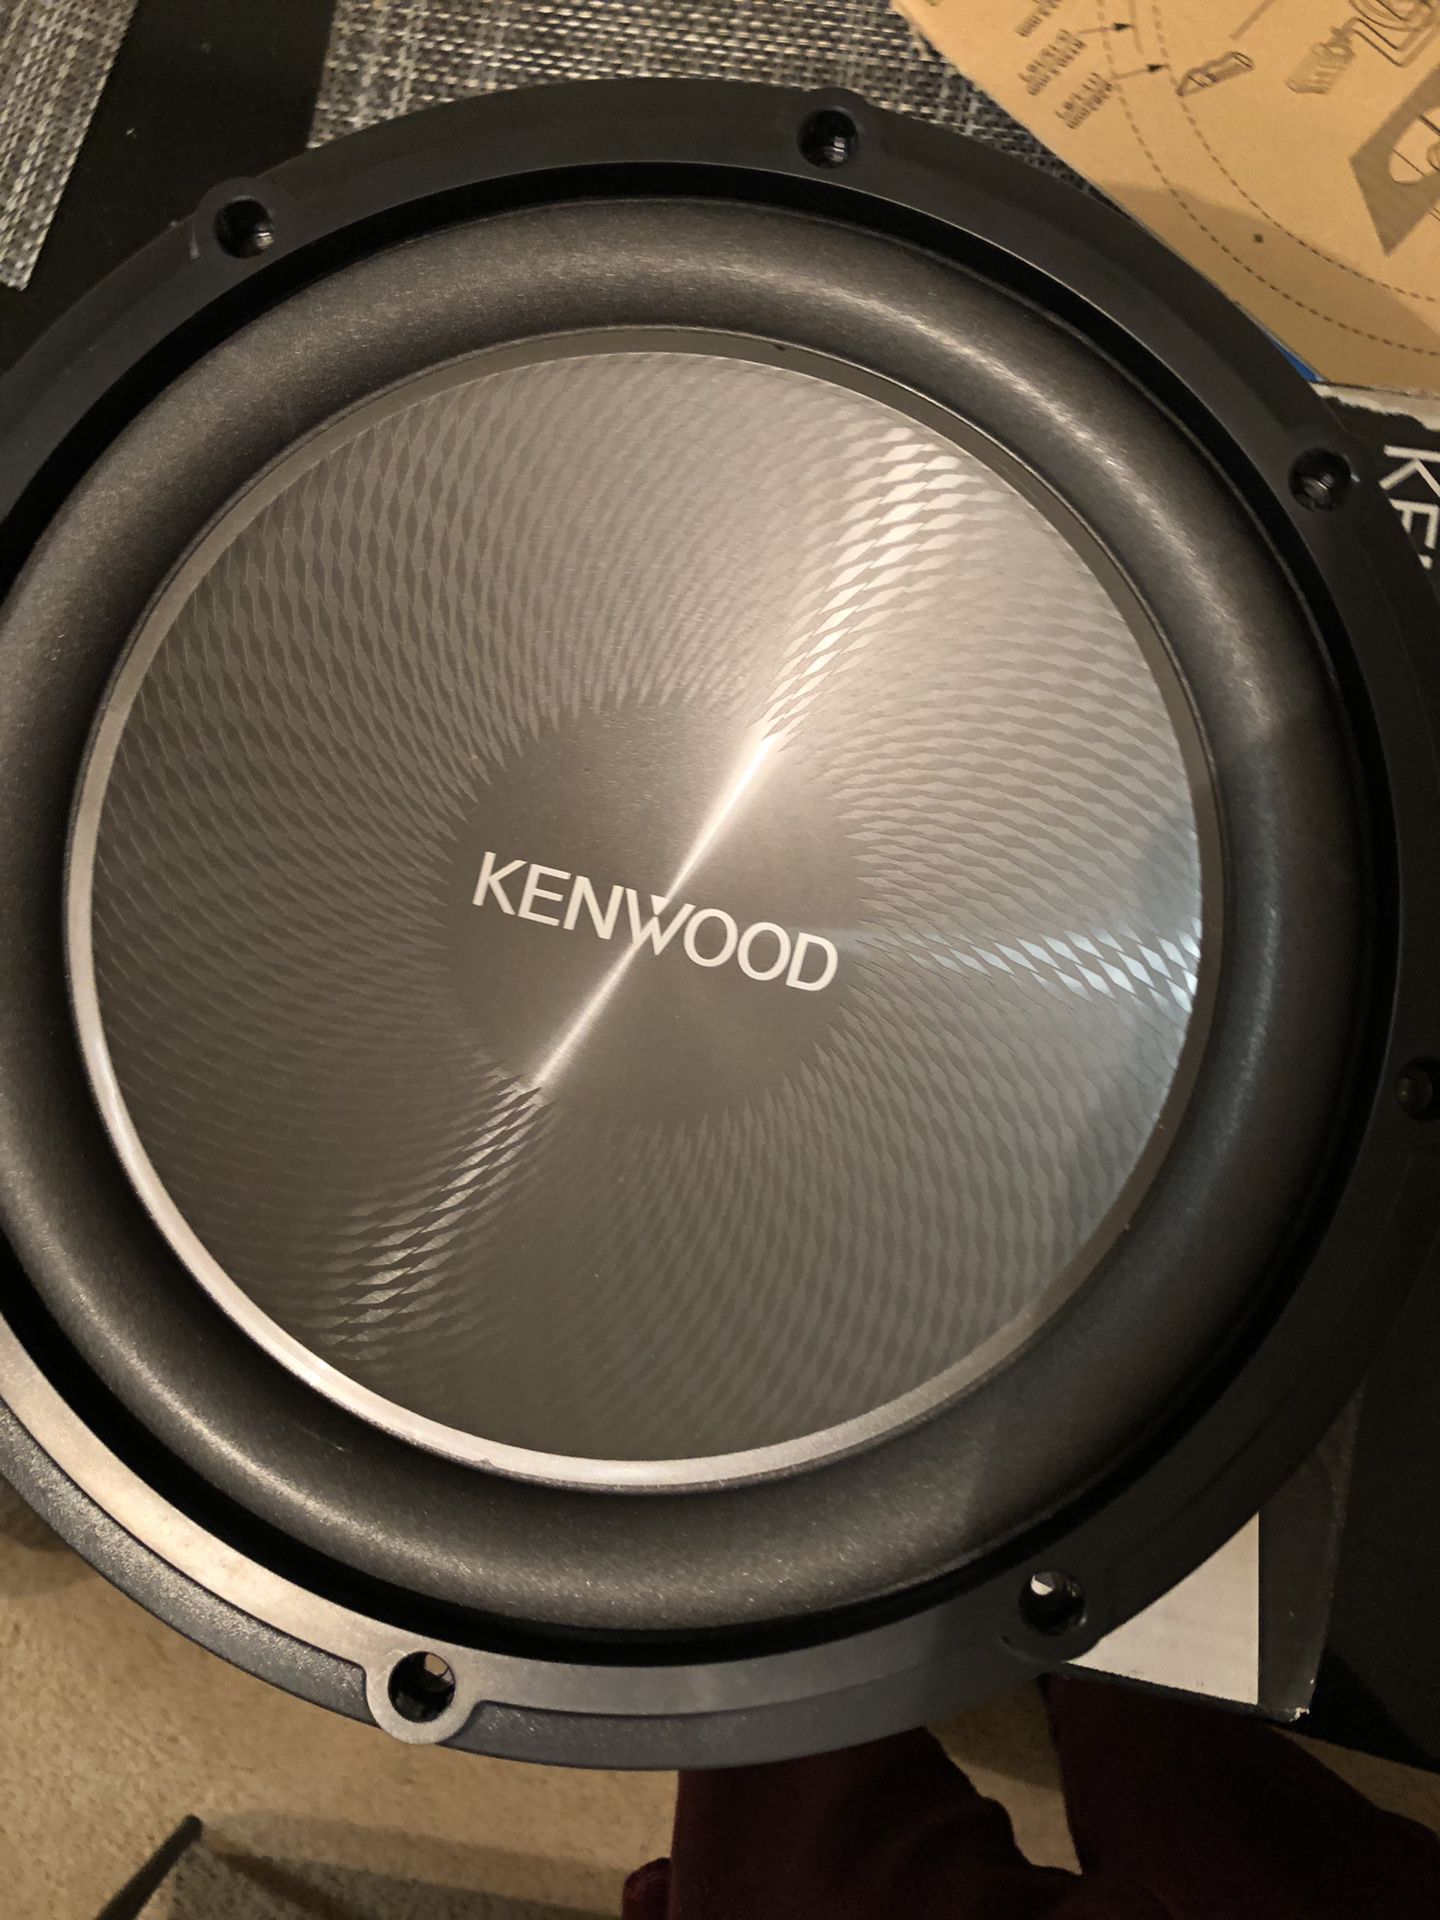 Kenwood 1000W 12” Subwoofer and 1000W Amplifier